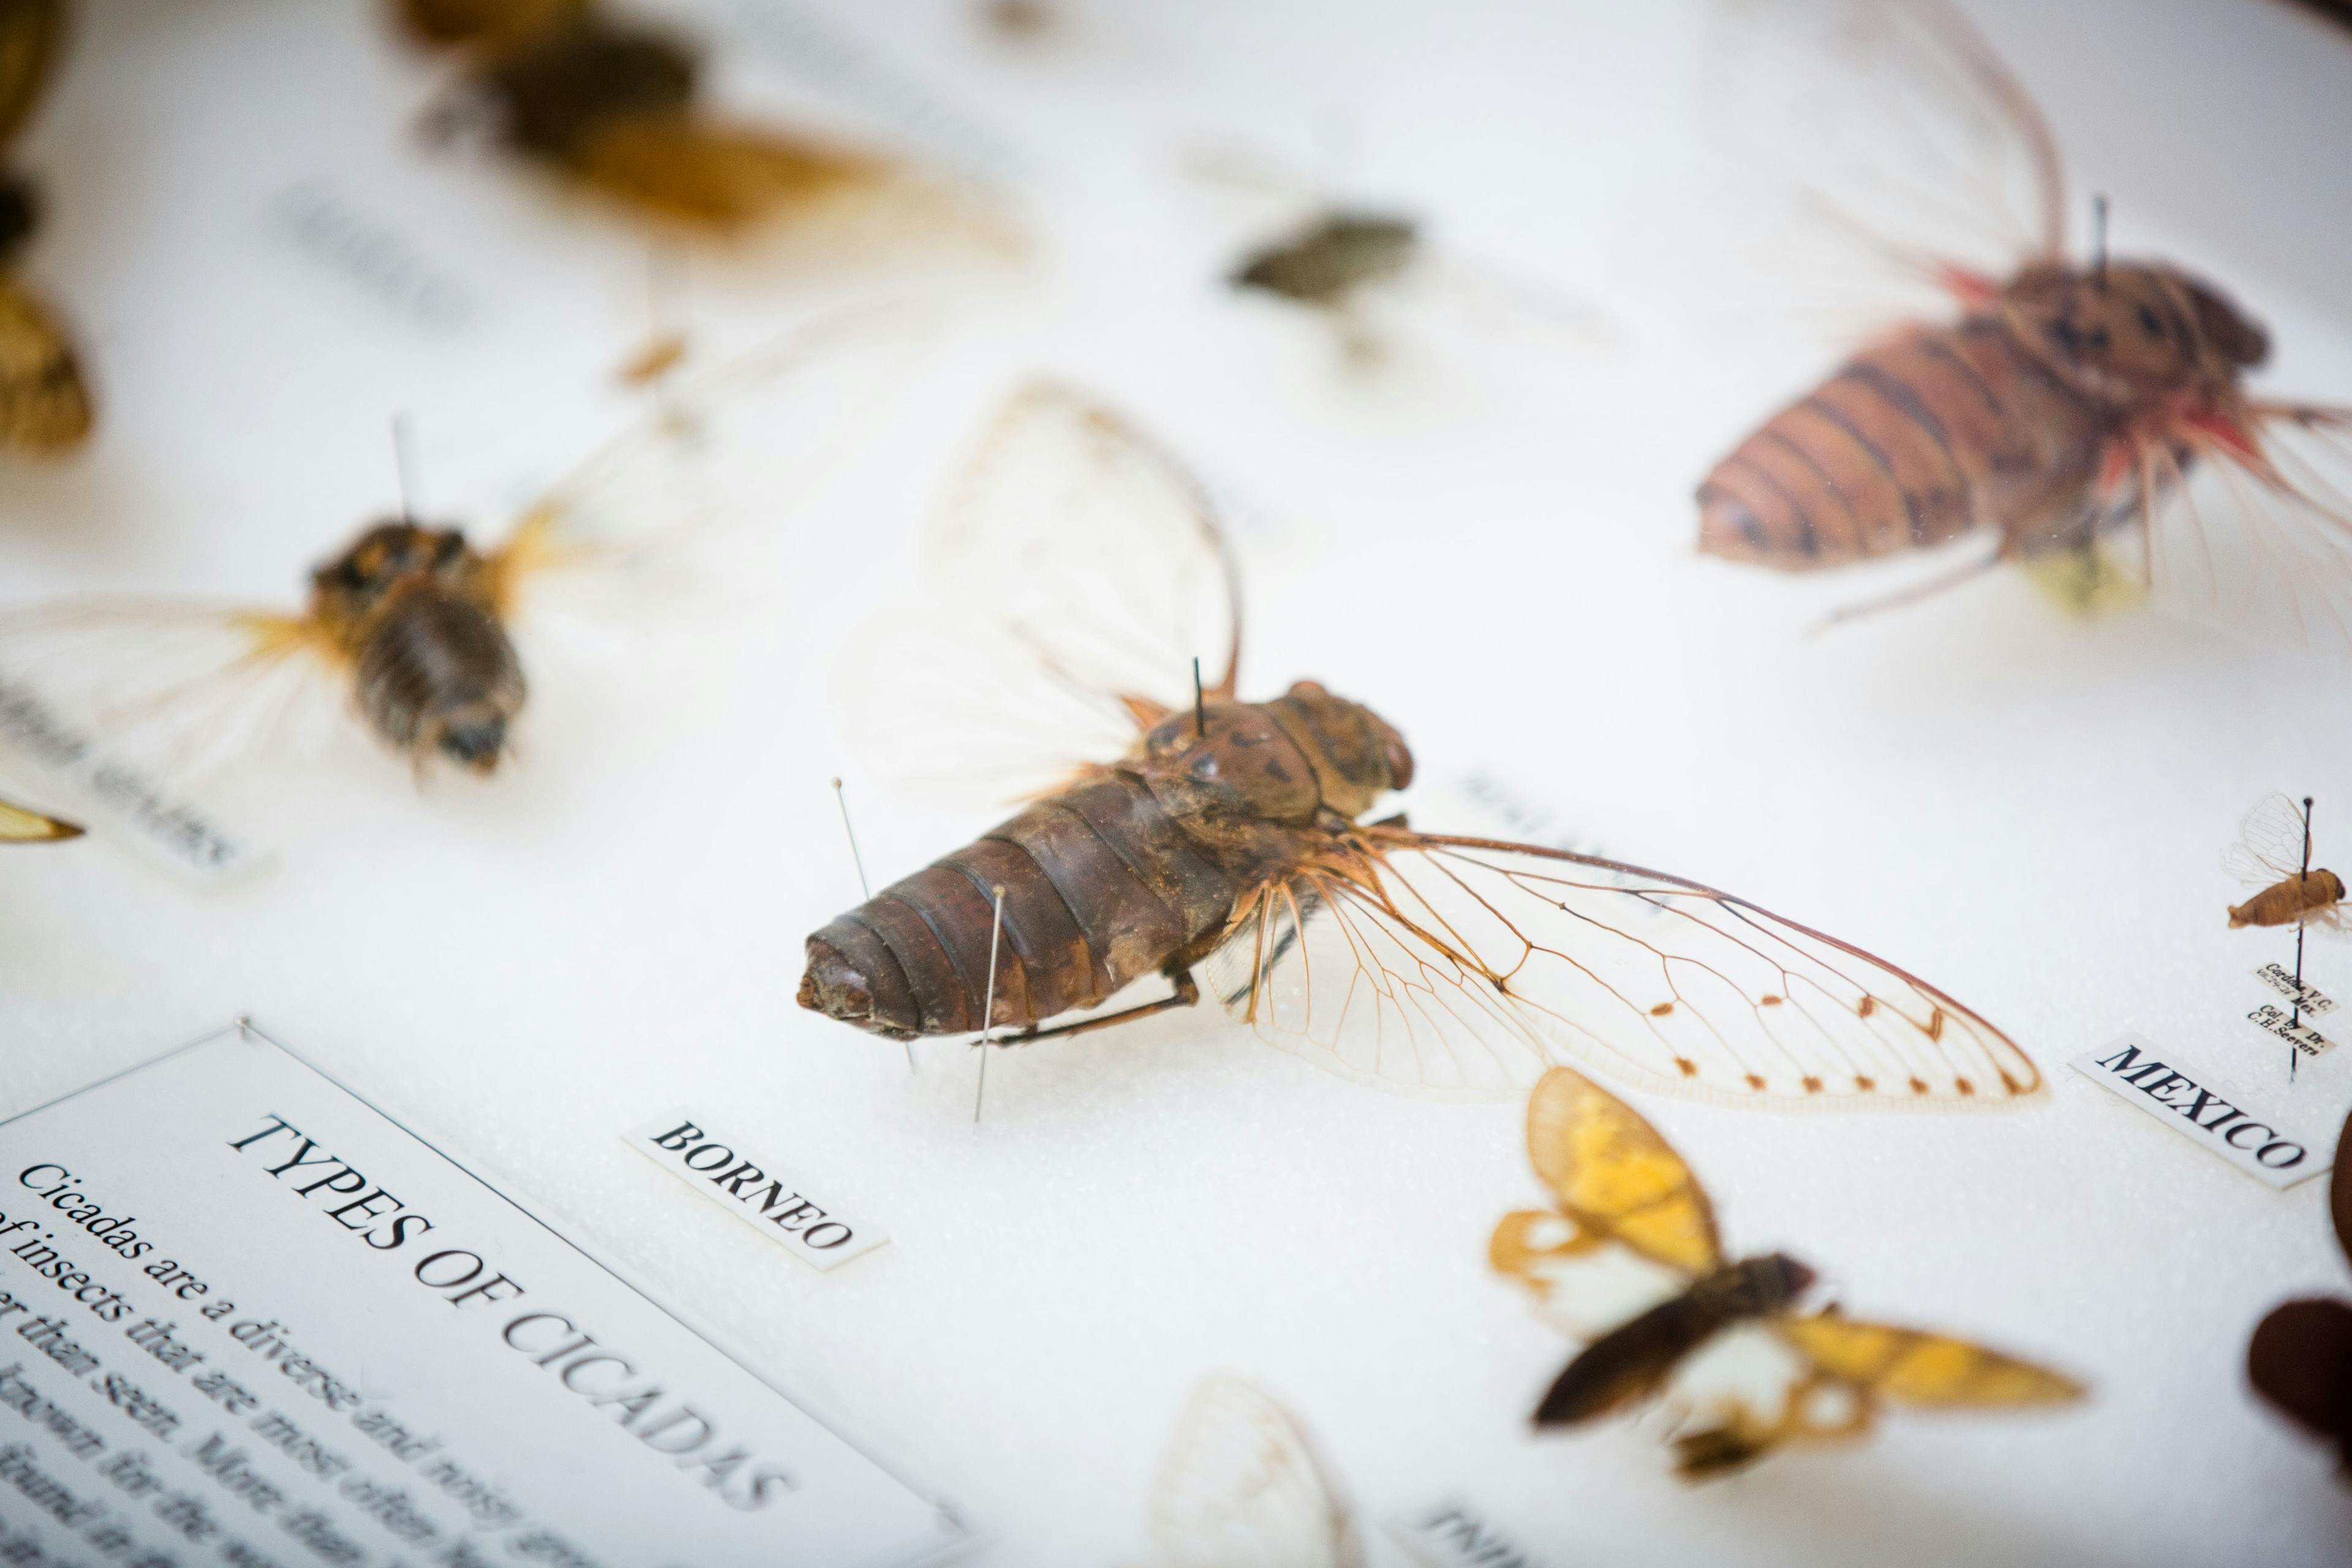 A pinned cicada, mounted on a white board. Several other specimens and some text are also seen.